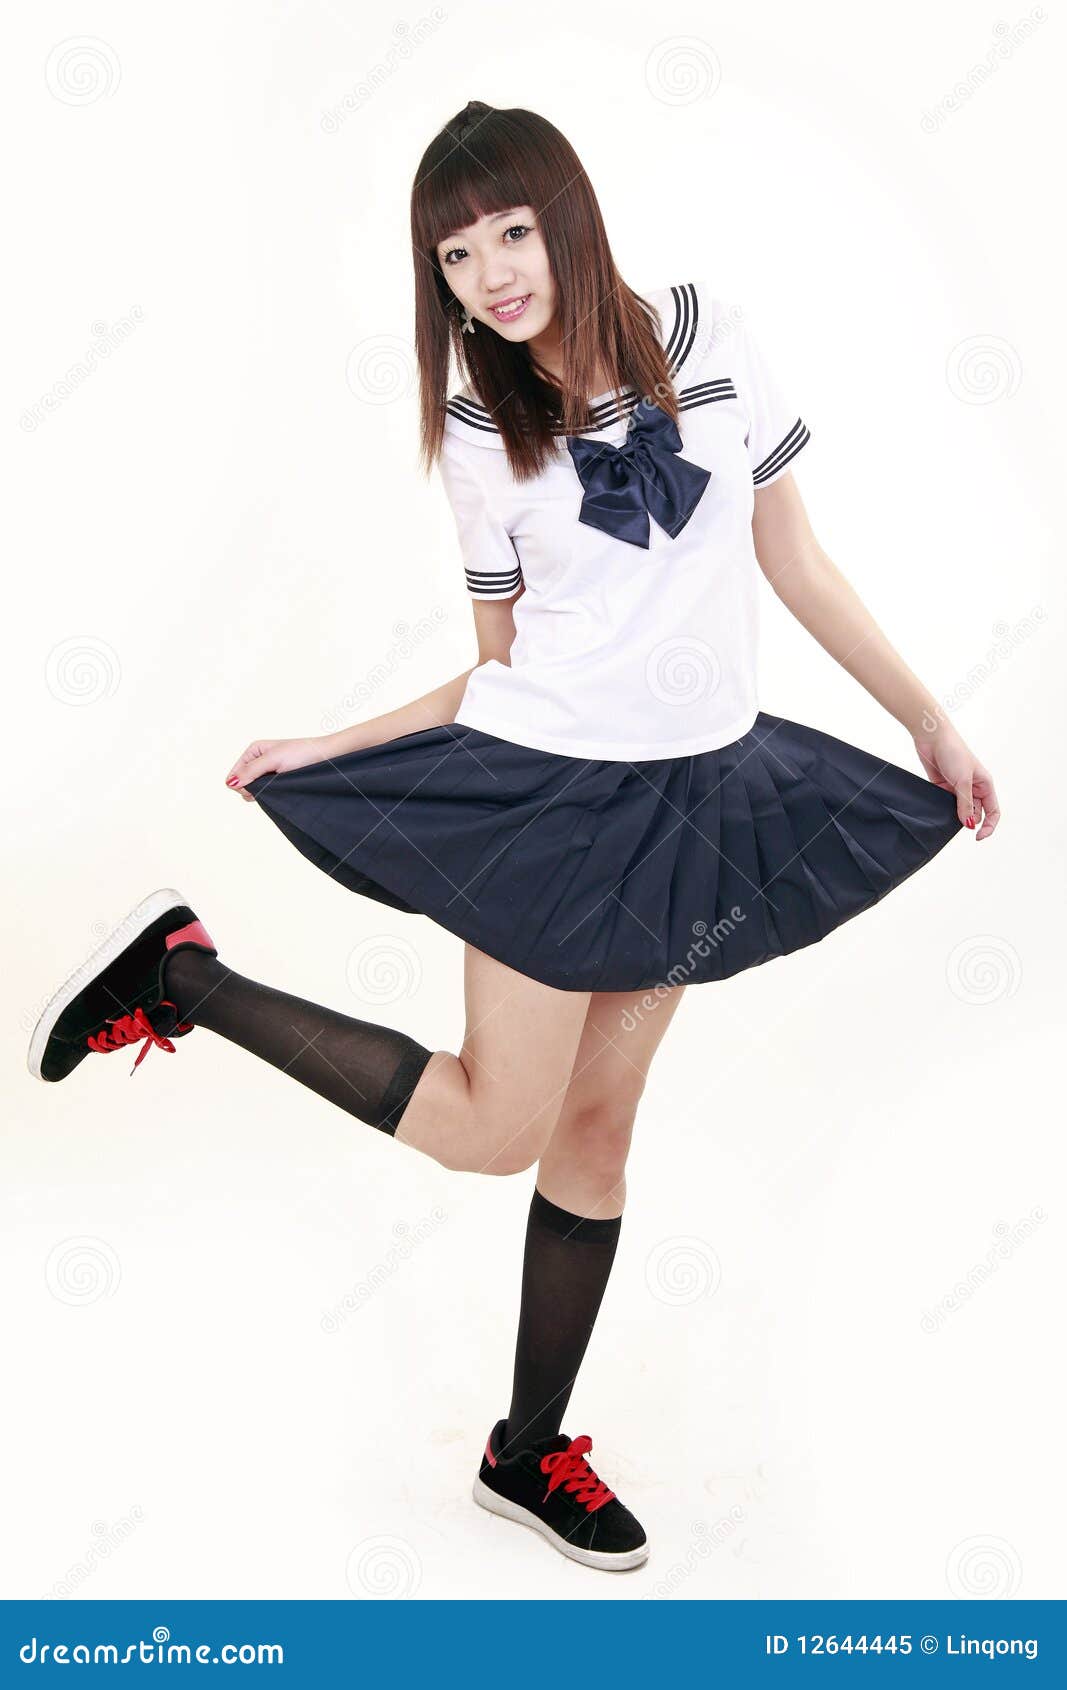 2 959 Japanese Schoolgirl Photos Free Royalty Free Stock Photos From Dreamstime